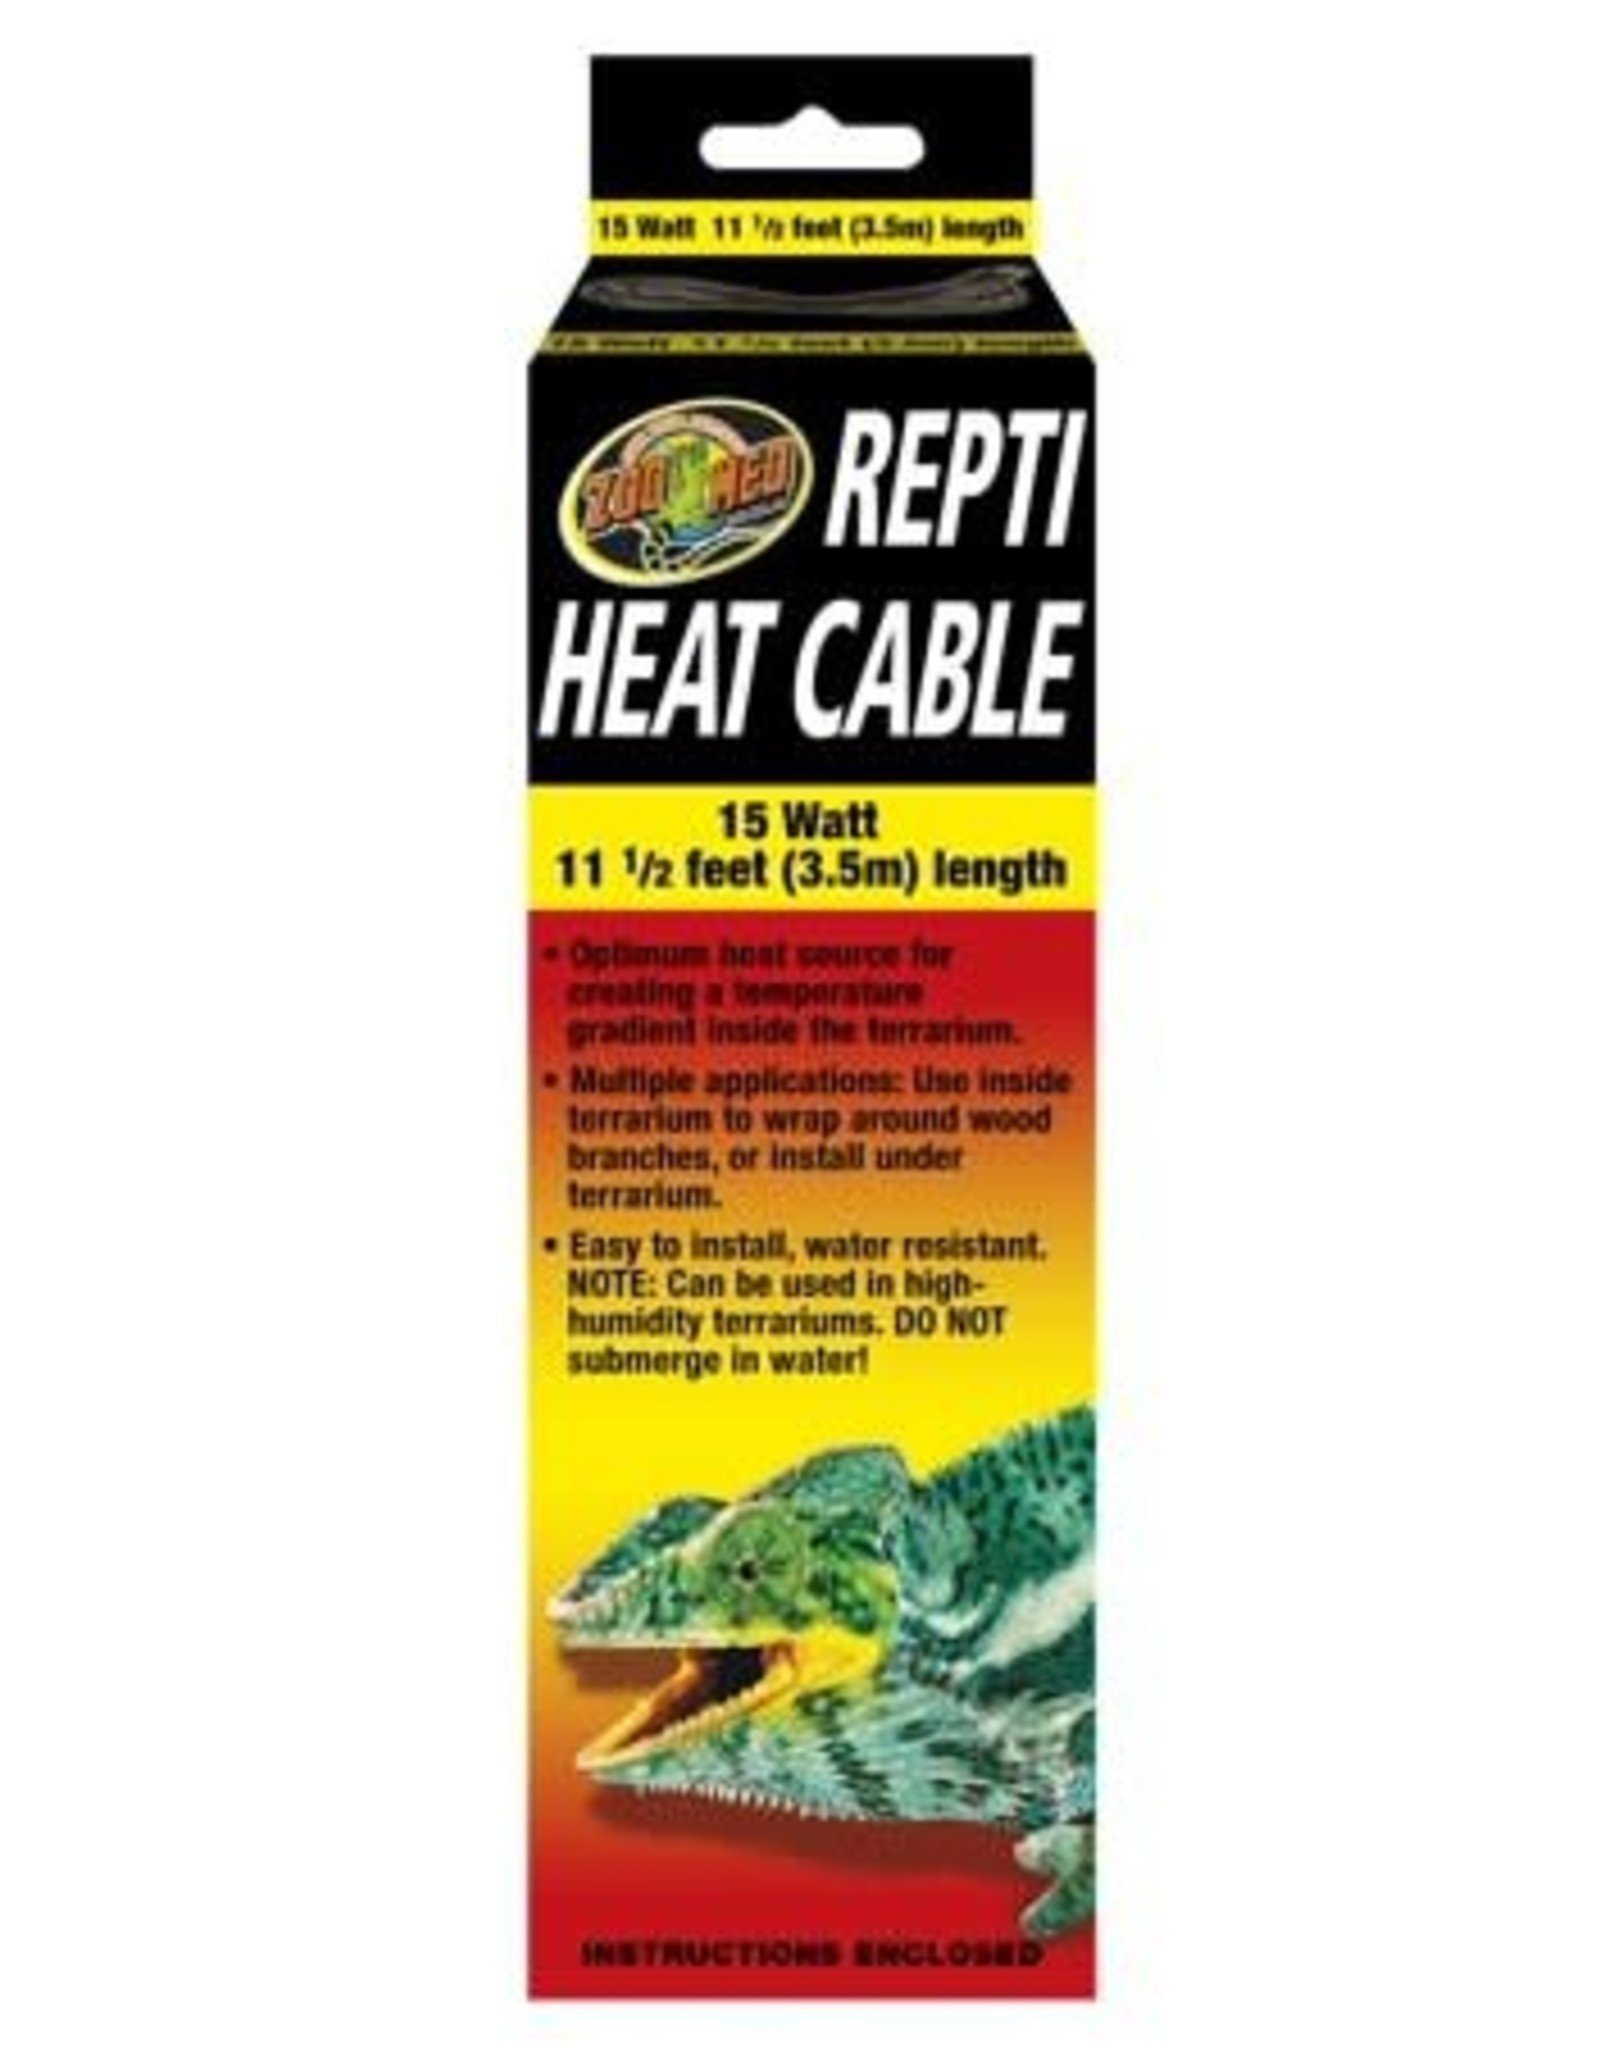 ZOO MED LABORATORIES, INC. ZOO MED- RHC-15- REPTI- HEAT CABLE- 8.25X2.5X2- 11.5FT- 15W